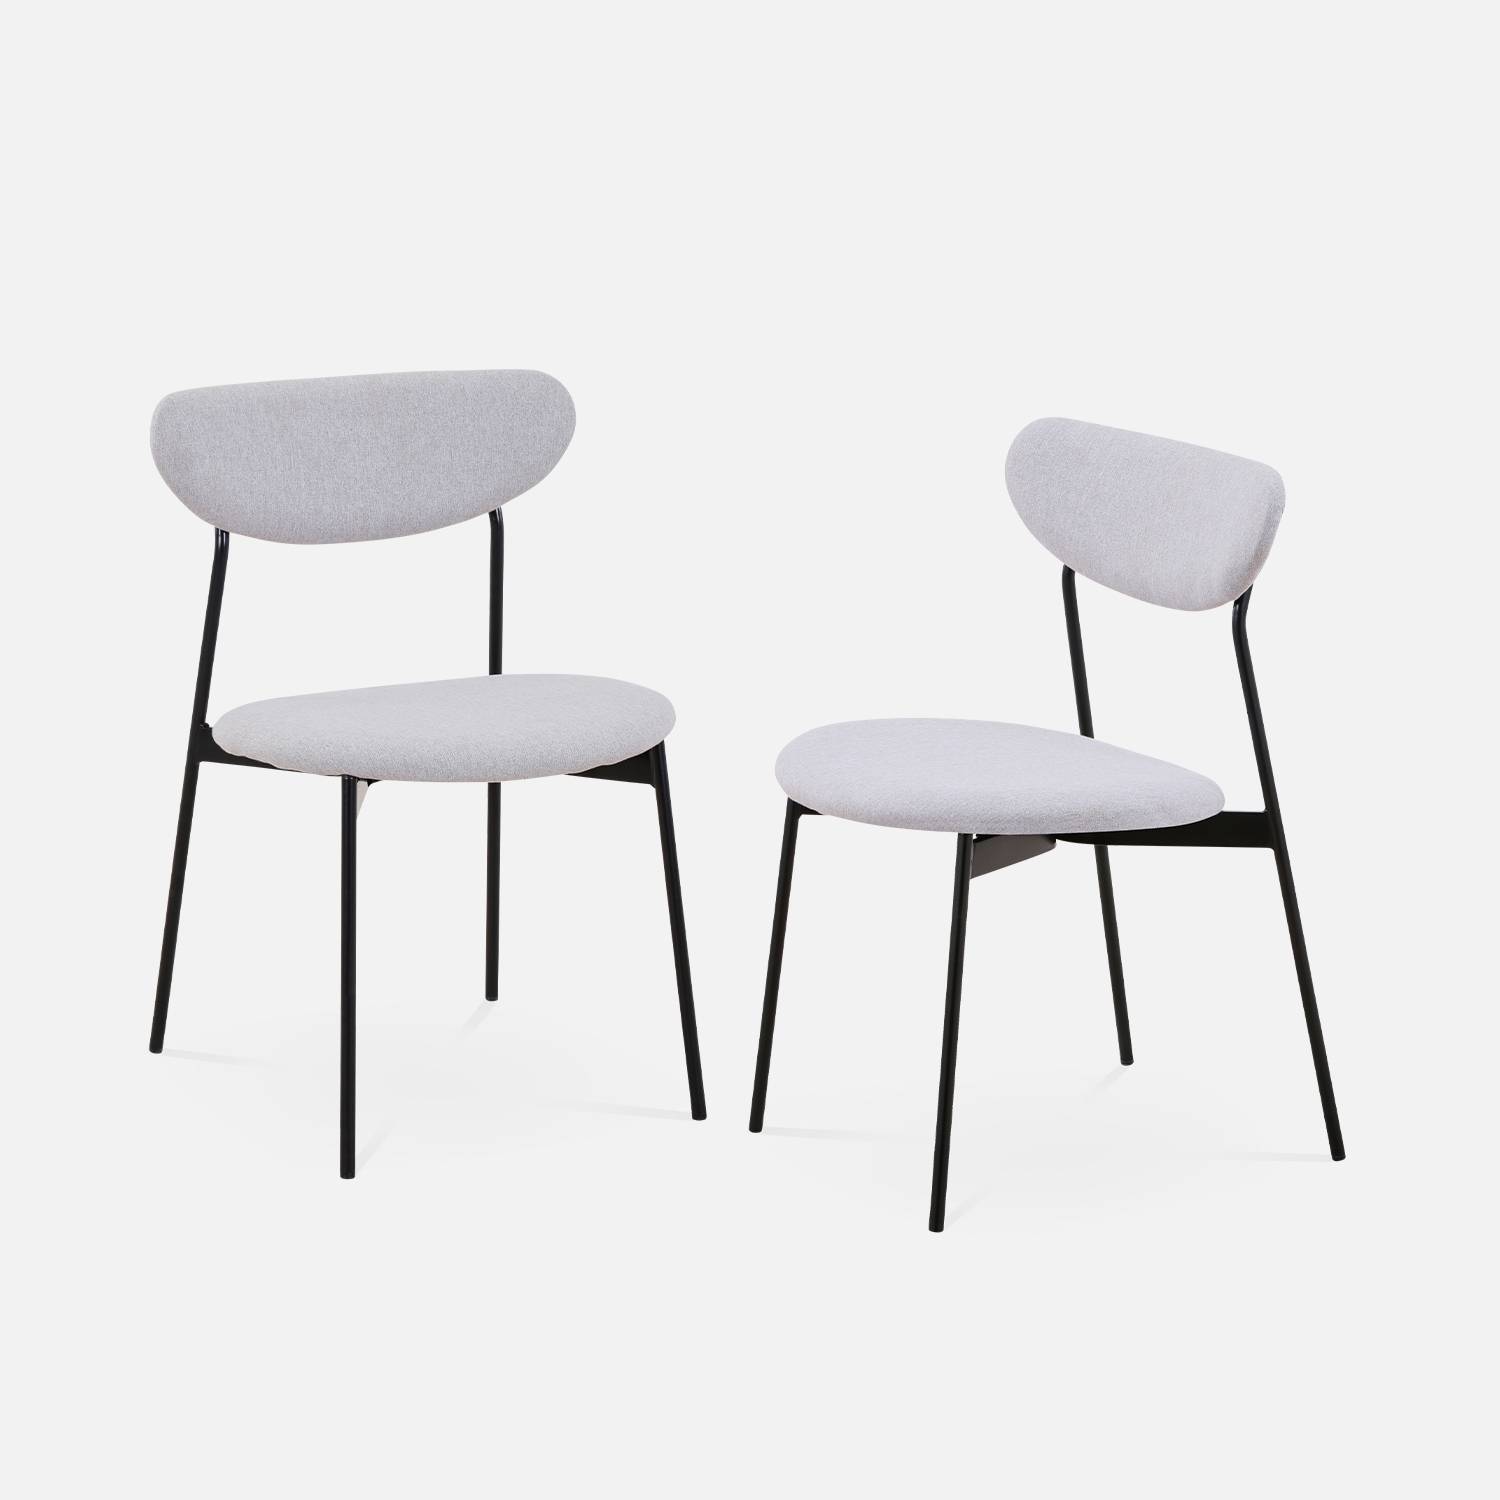 Set of 2 retro style dining chairs with steel legs, Light Grey | sweeek